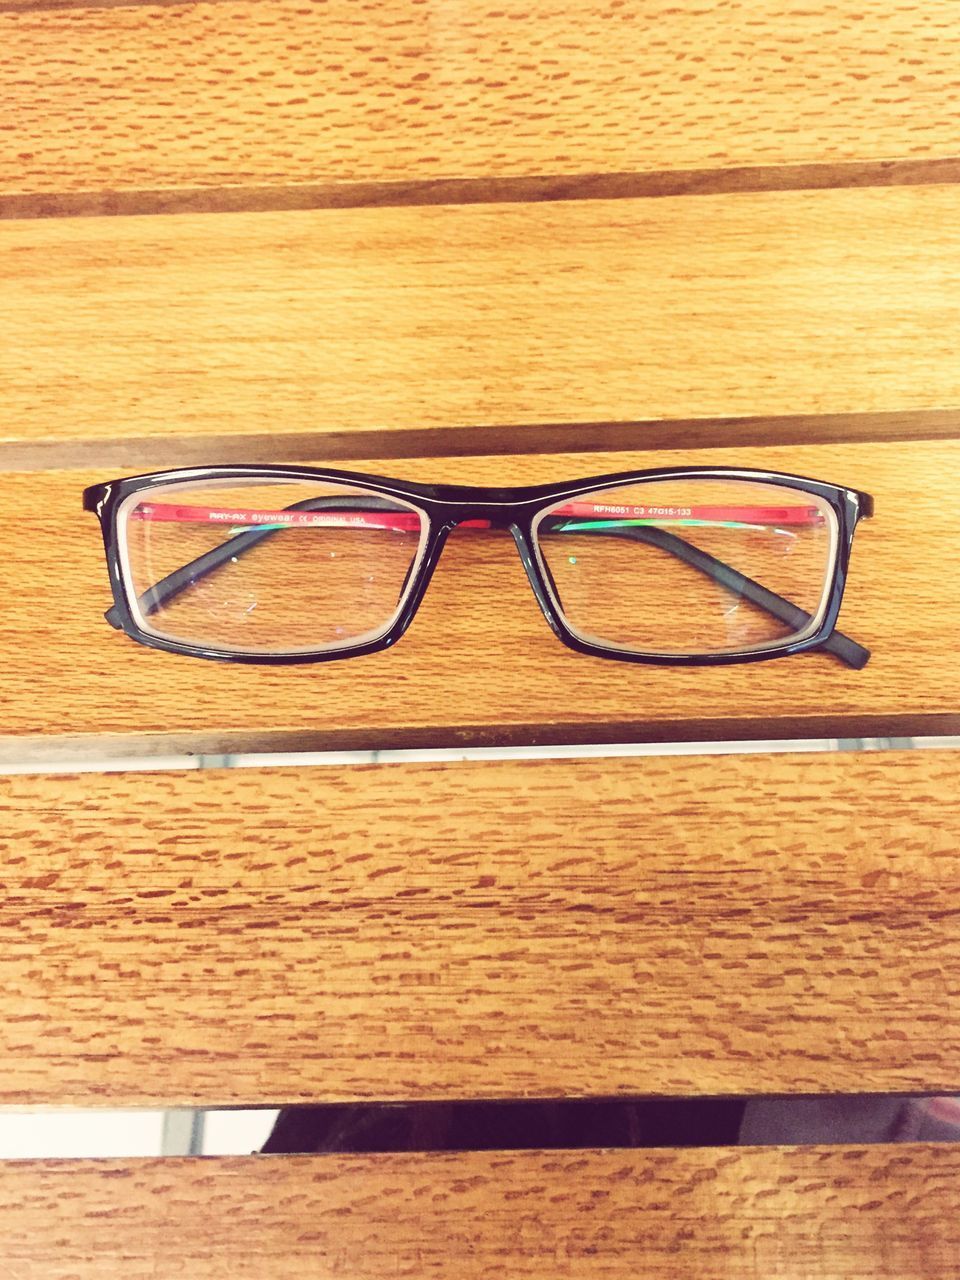 CLOSE-UP OF EYEGLASSES AND TABLE